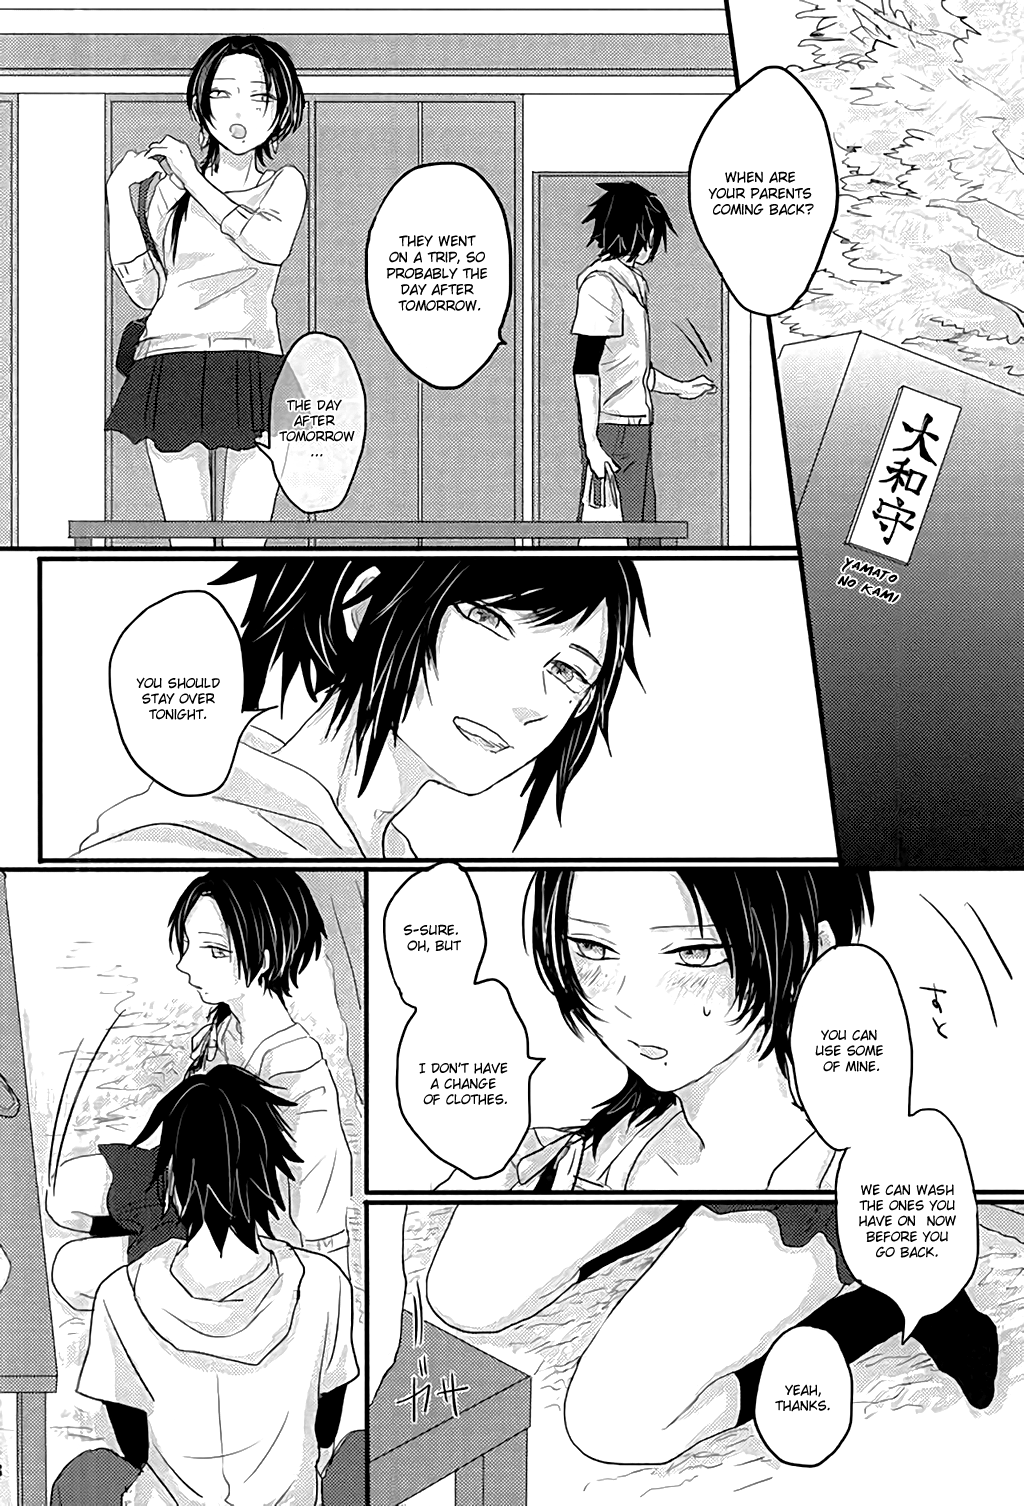 (SPARK10) [glowfly (JULLY)] After the strawberry (Touken Ranbu) [English] [Momoiro] (SPARK10) [glowfly (JULLY)] After the strawberry (刀剣乱舞) [英訳]